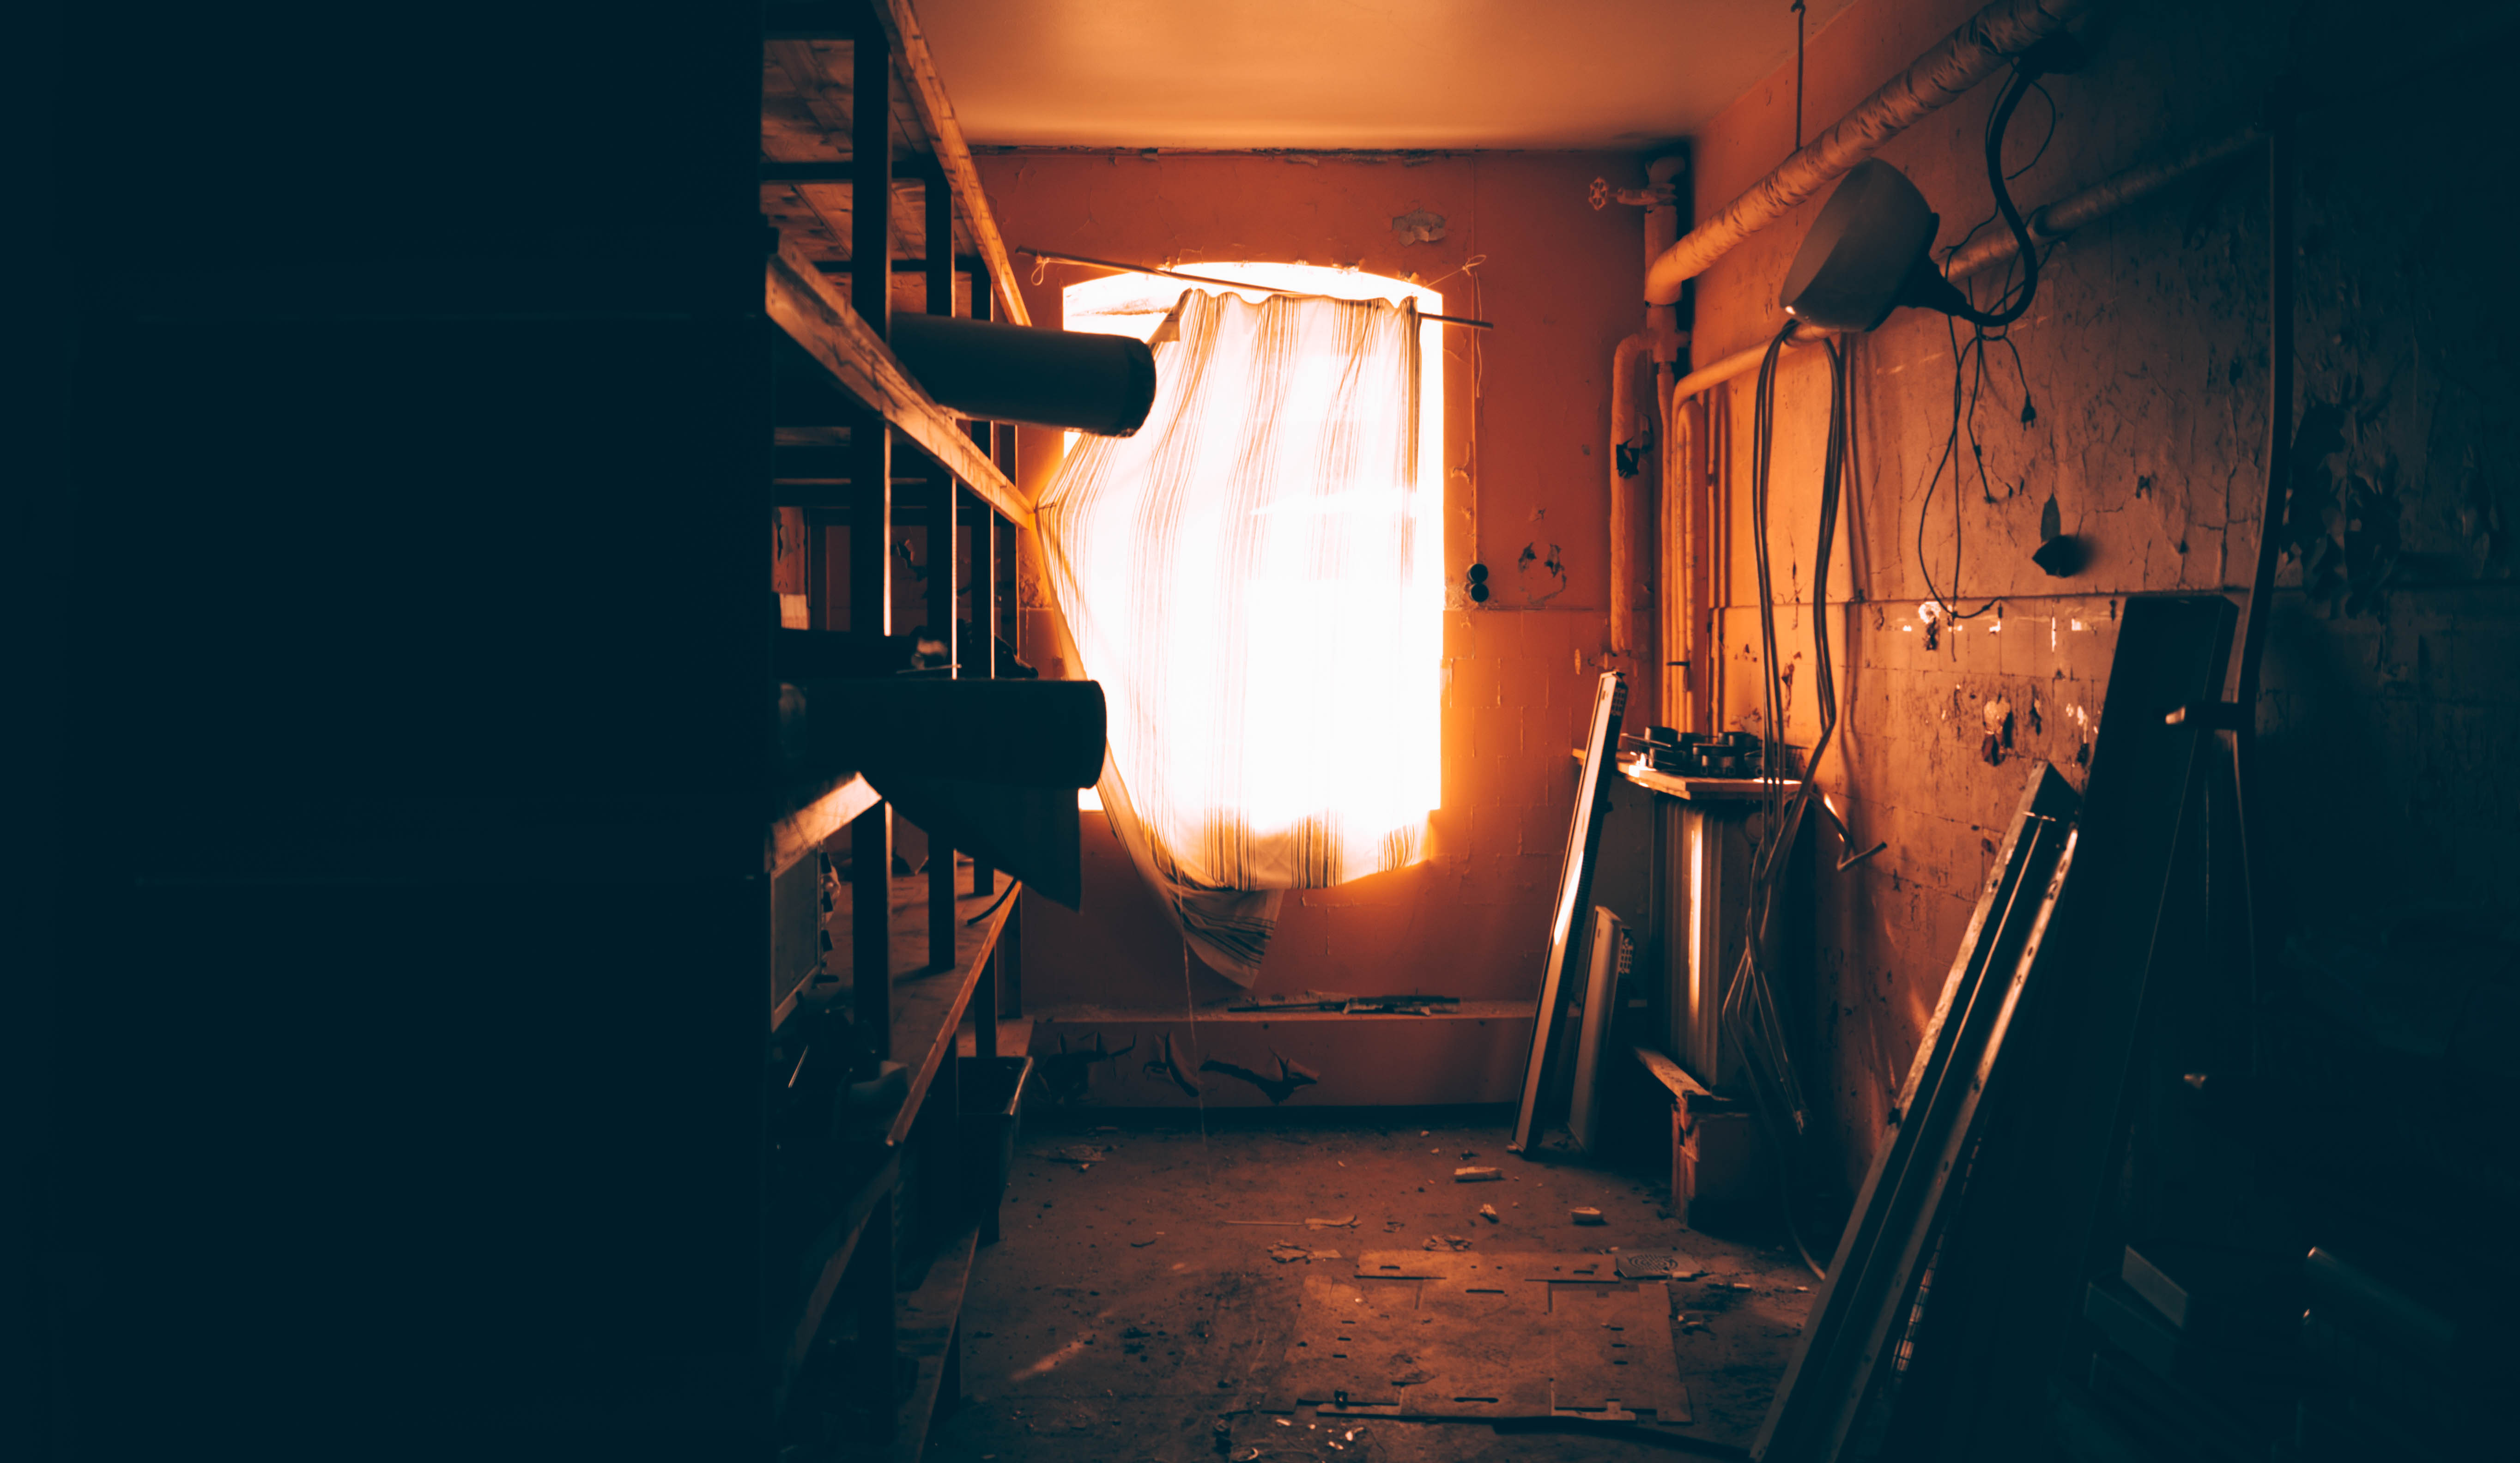 sunlight, Warm colors, Window, Urban decay, Curtains, Abandoned Wallpaper